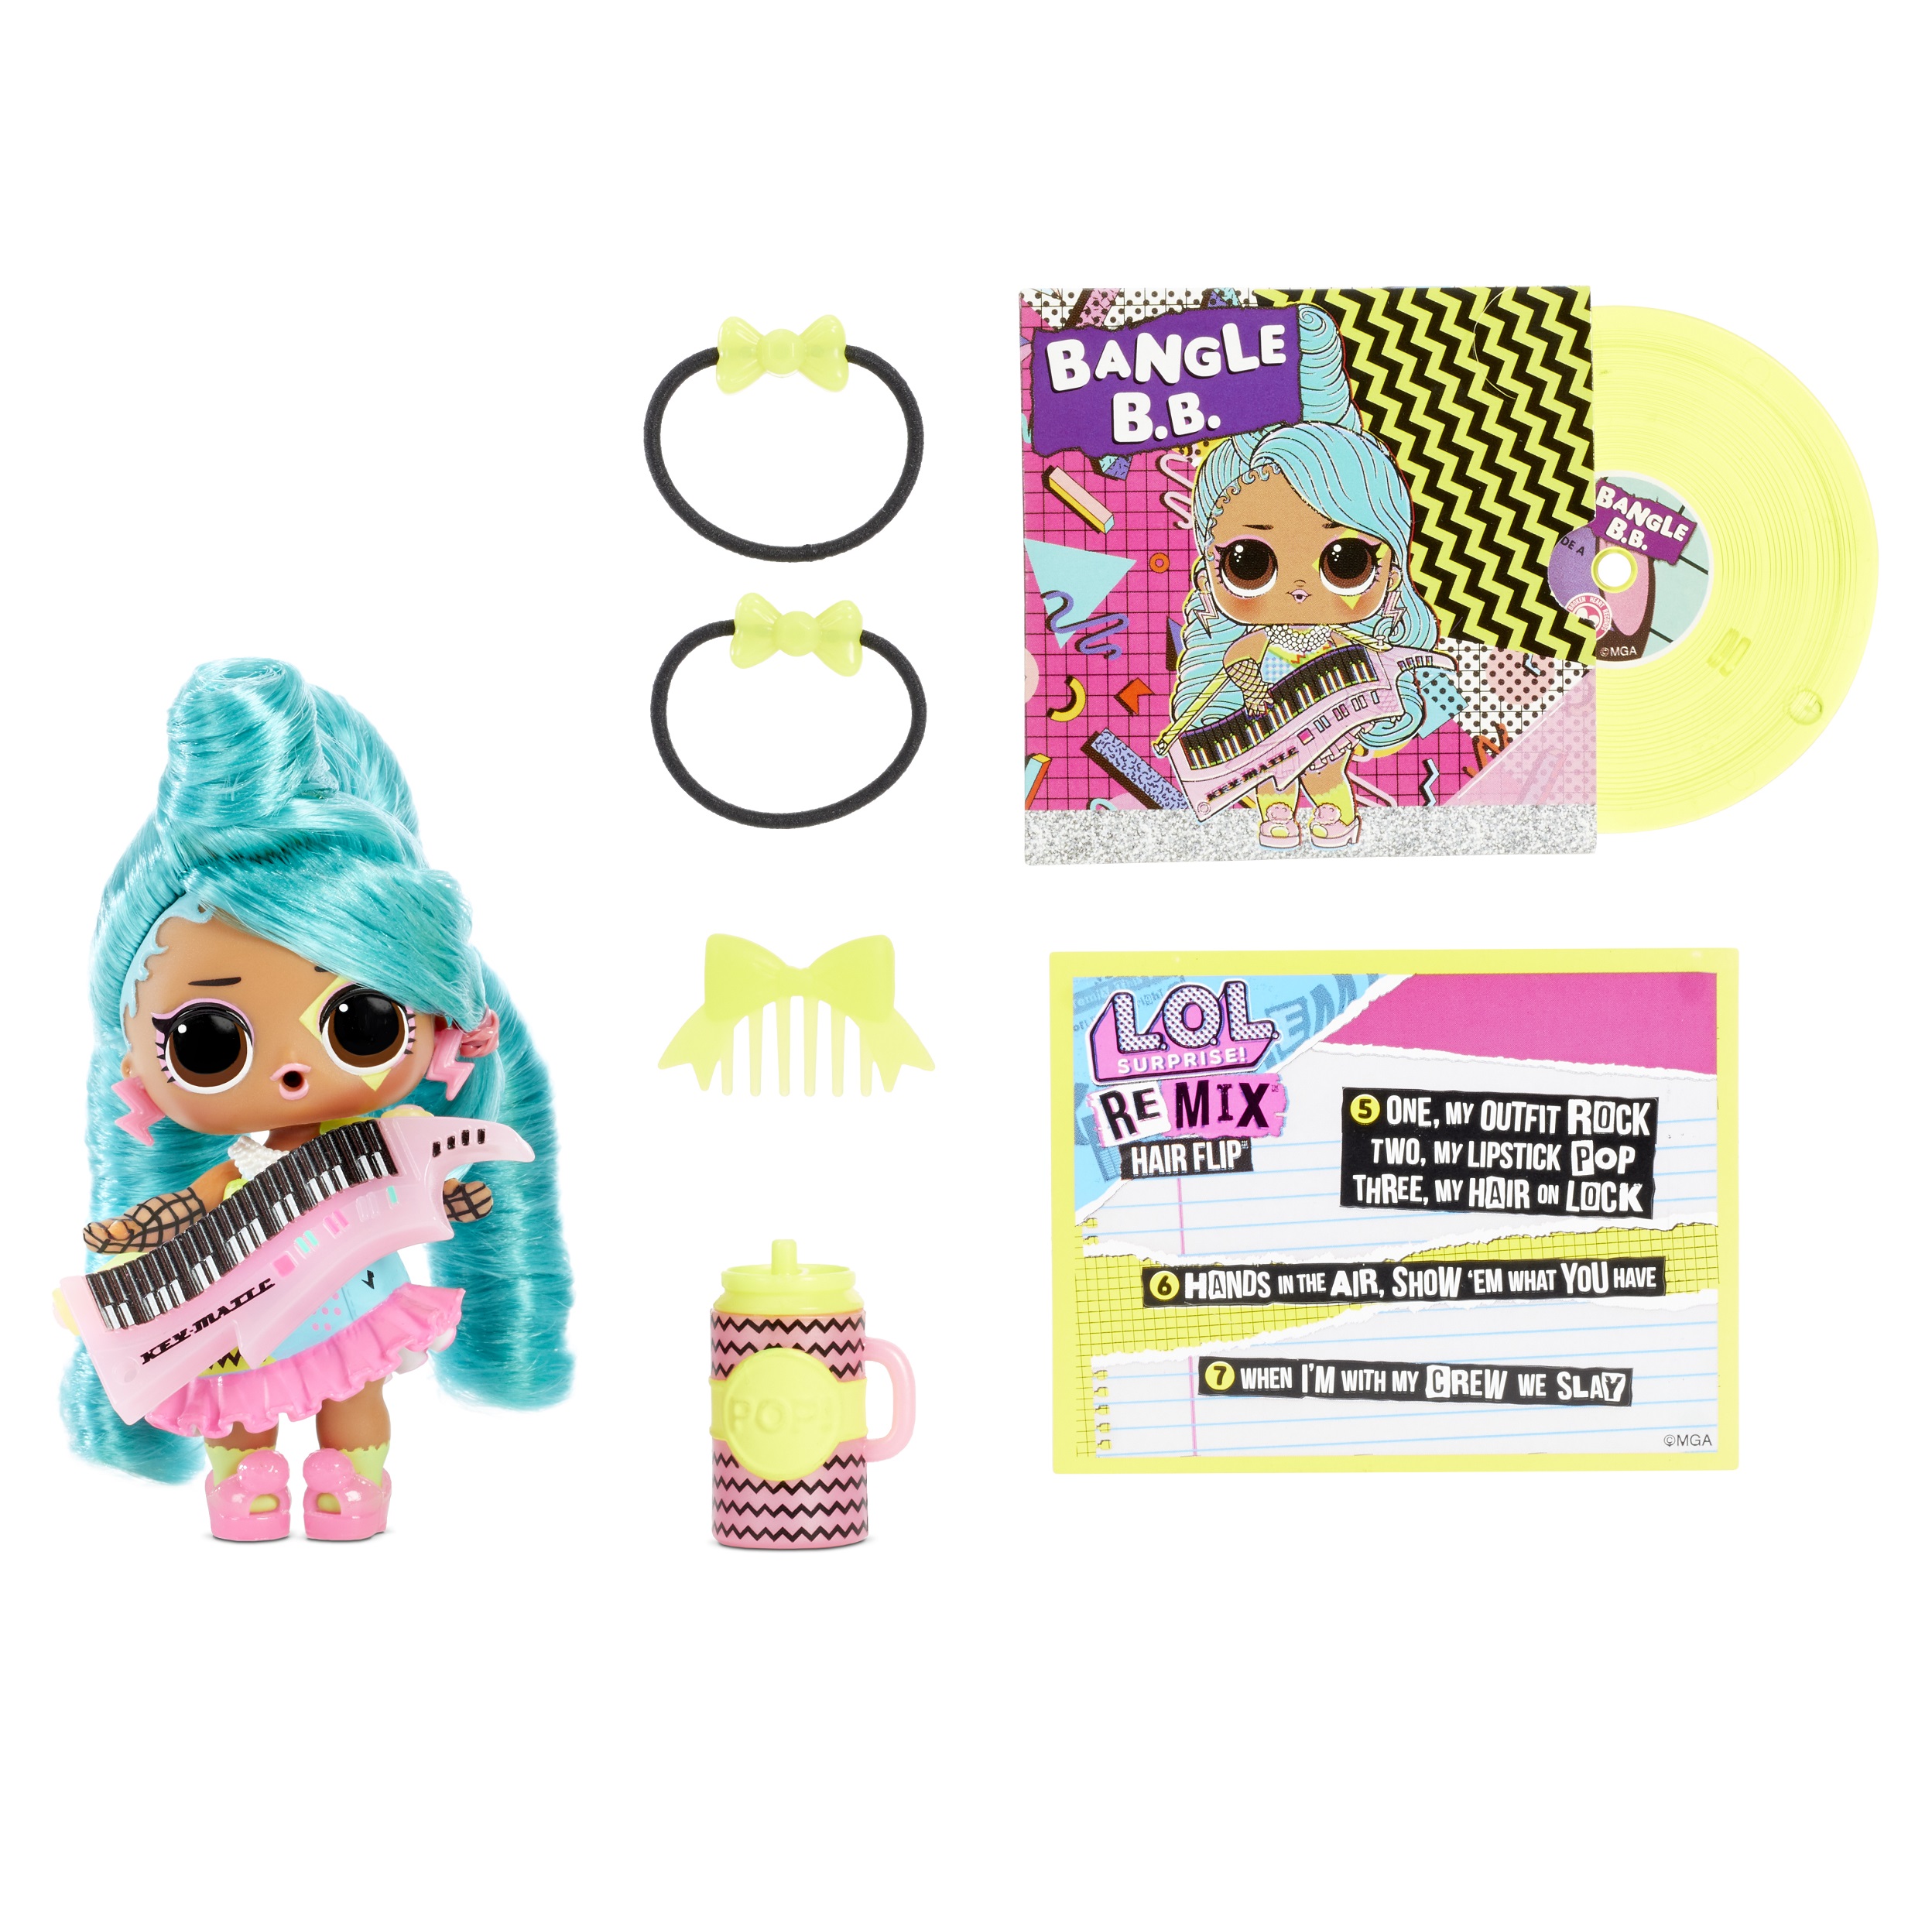 LOL Surprise Remix Hair Flip Dolls - 15 Surprises With Hair Reveal & Music, Great Gift for Kids Ages 4 5 6+ - image 4 of 6